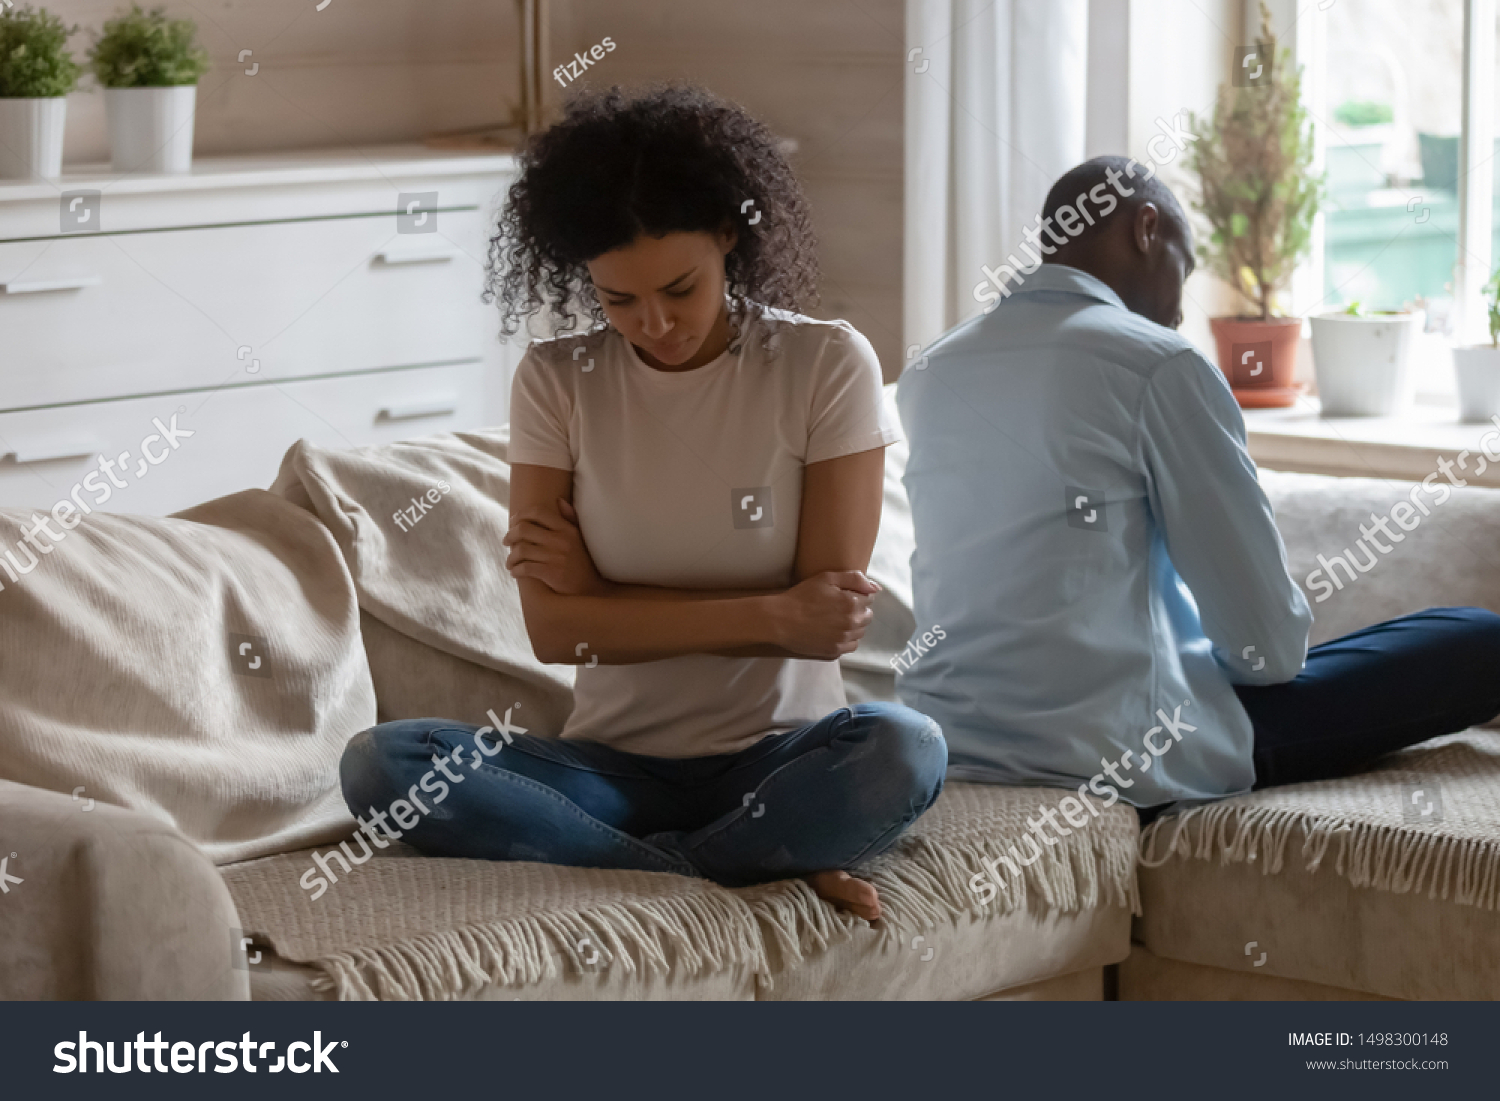 Stubborn african American husband and wife sit on couch back to back avoid talking after fight, mad offended biracial couple have family dispute or argument ignore each other, divorce concept #1498300148